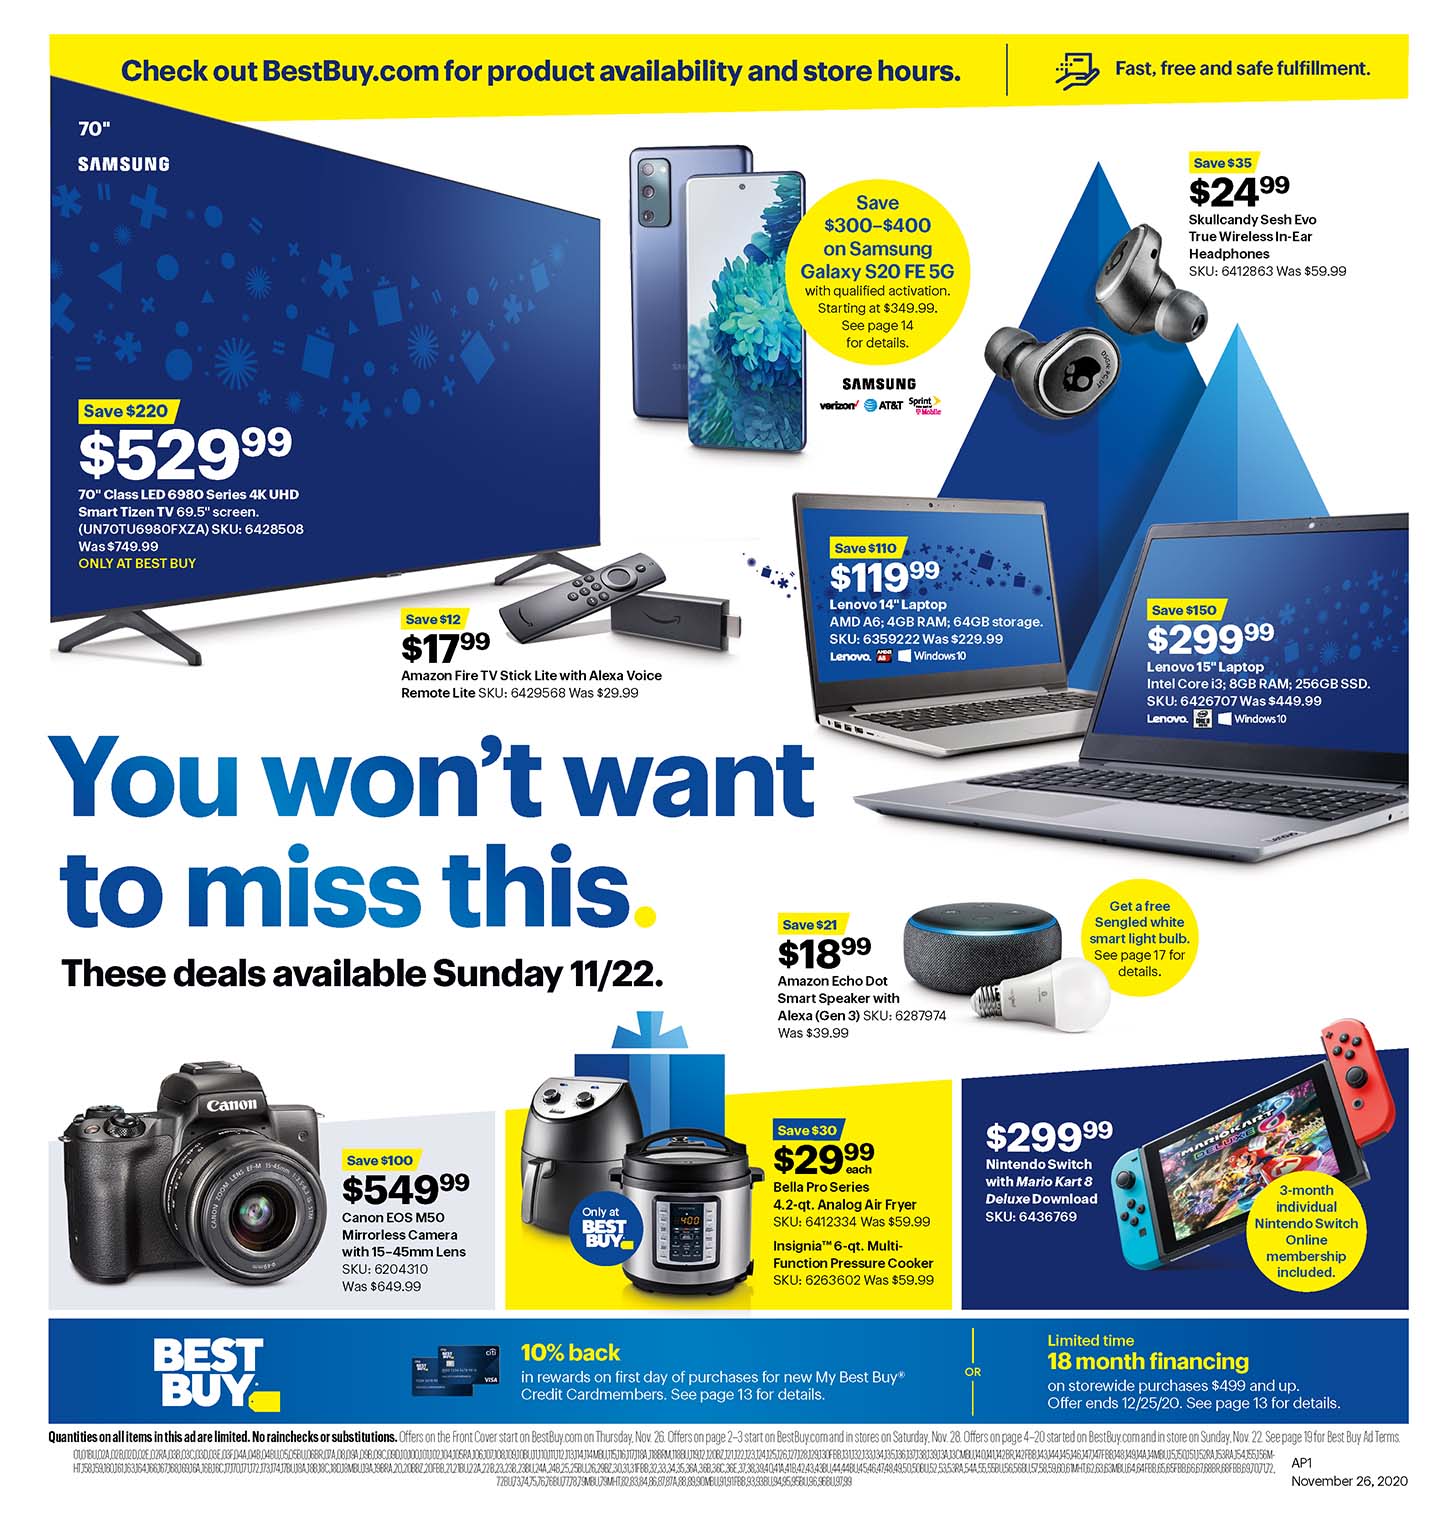 Best Buy Black Friday Ad 2020 - What Sales Does Bestbuy Have For Black Friday